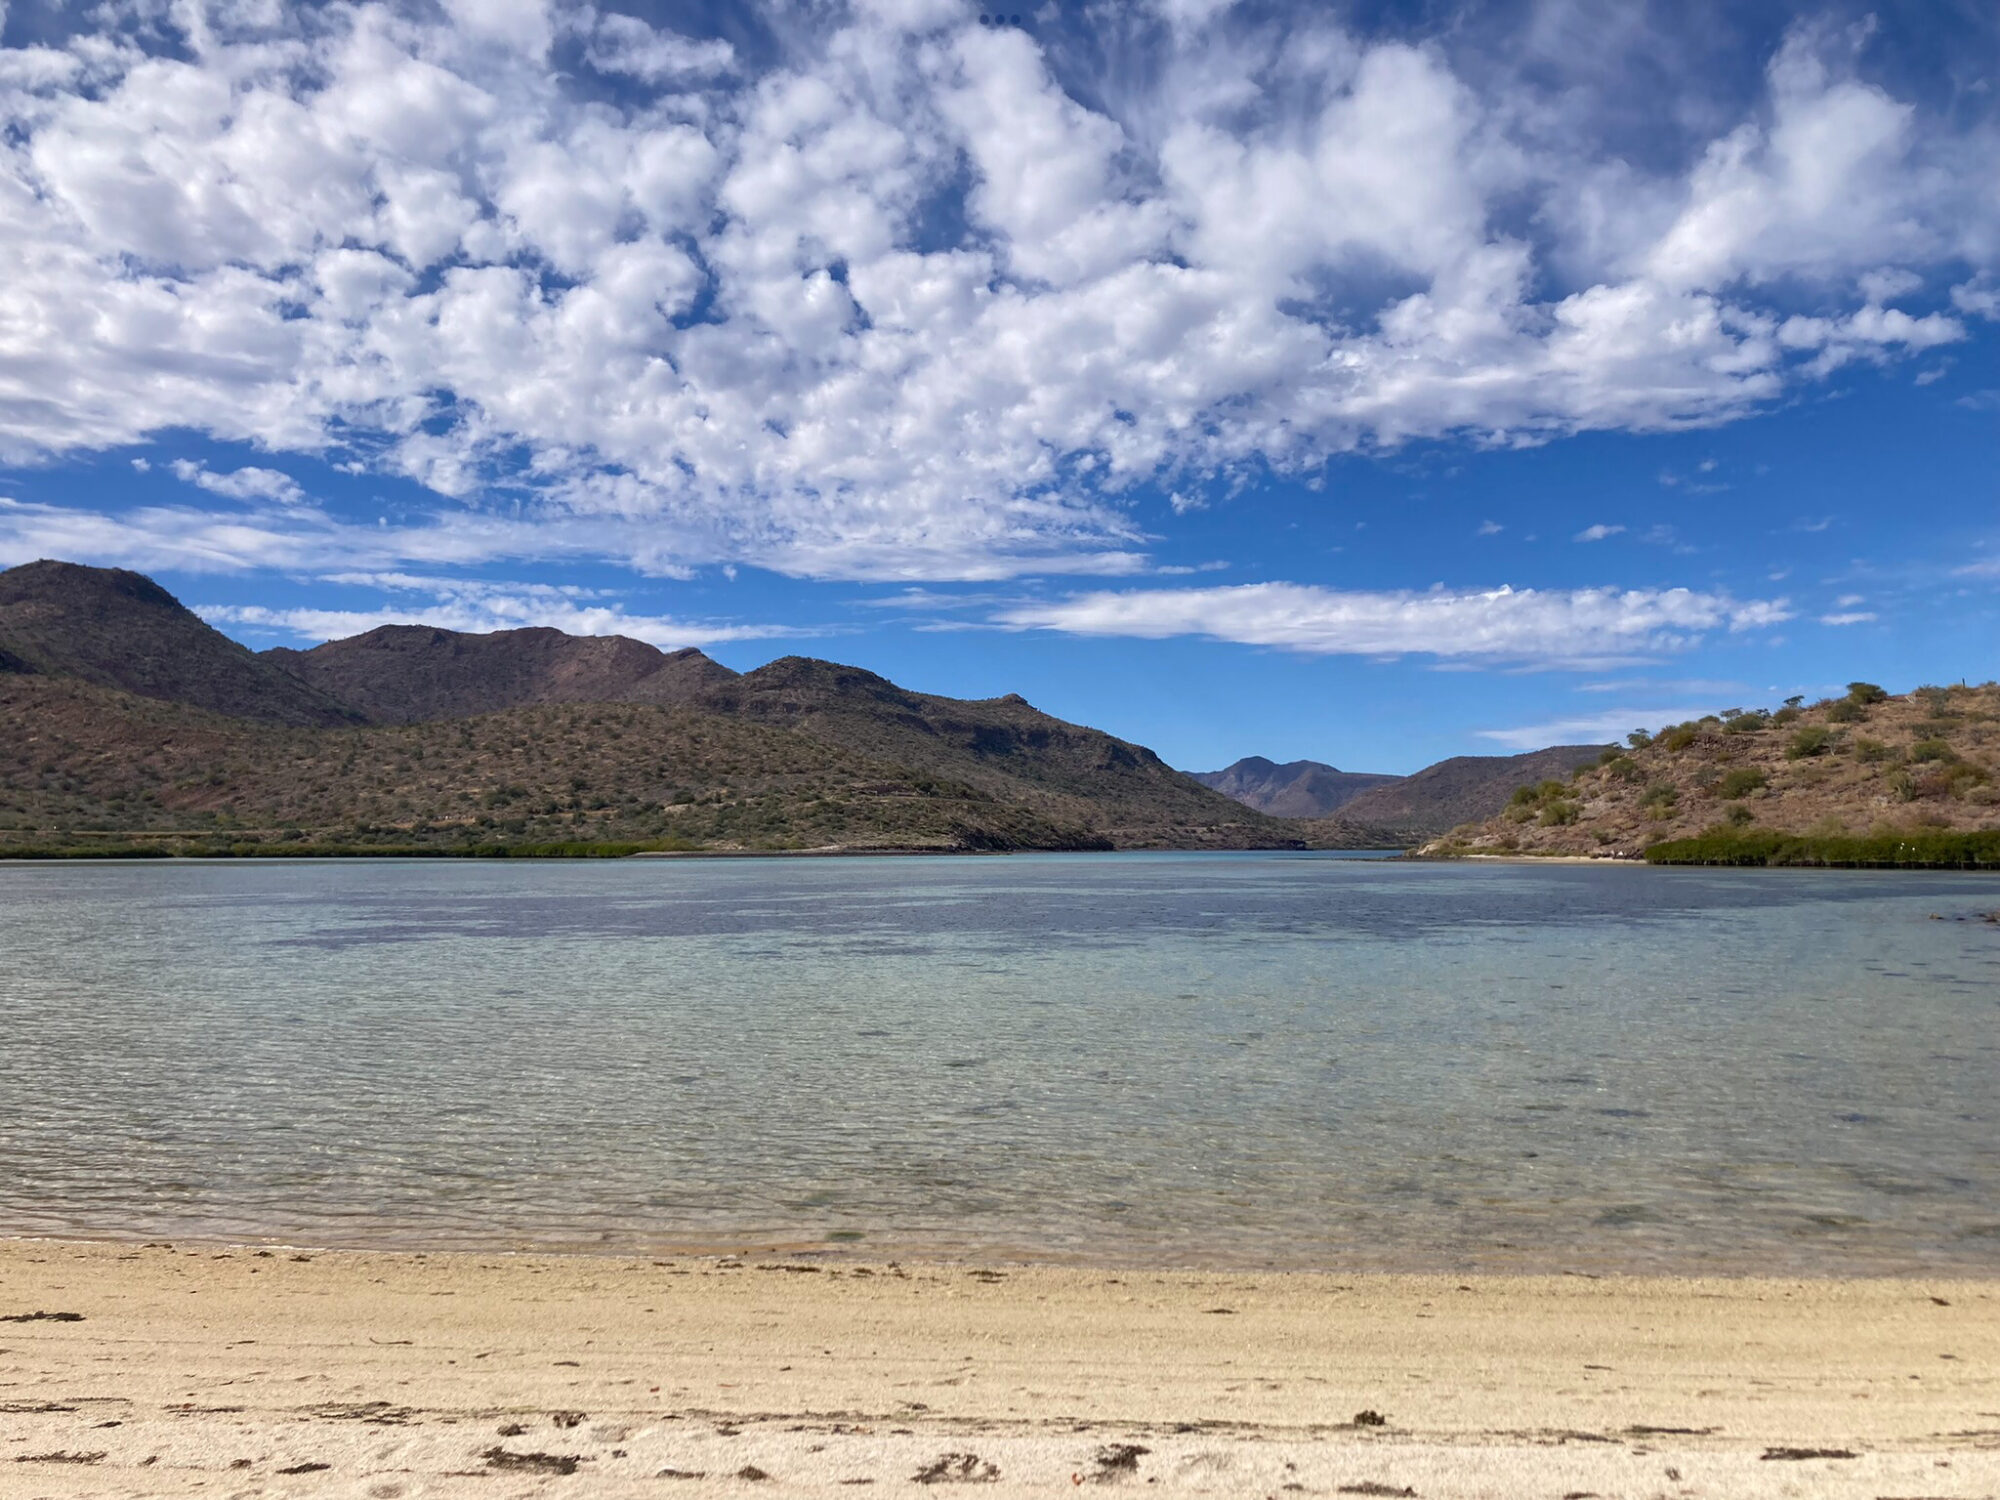 the waters of Playa El Requeson observed while camping in Baja California